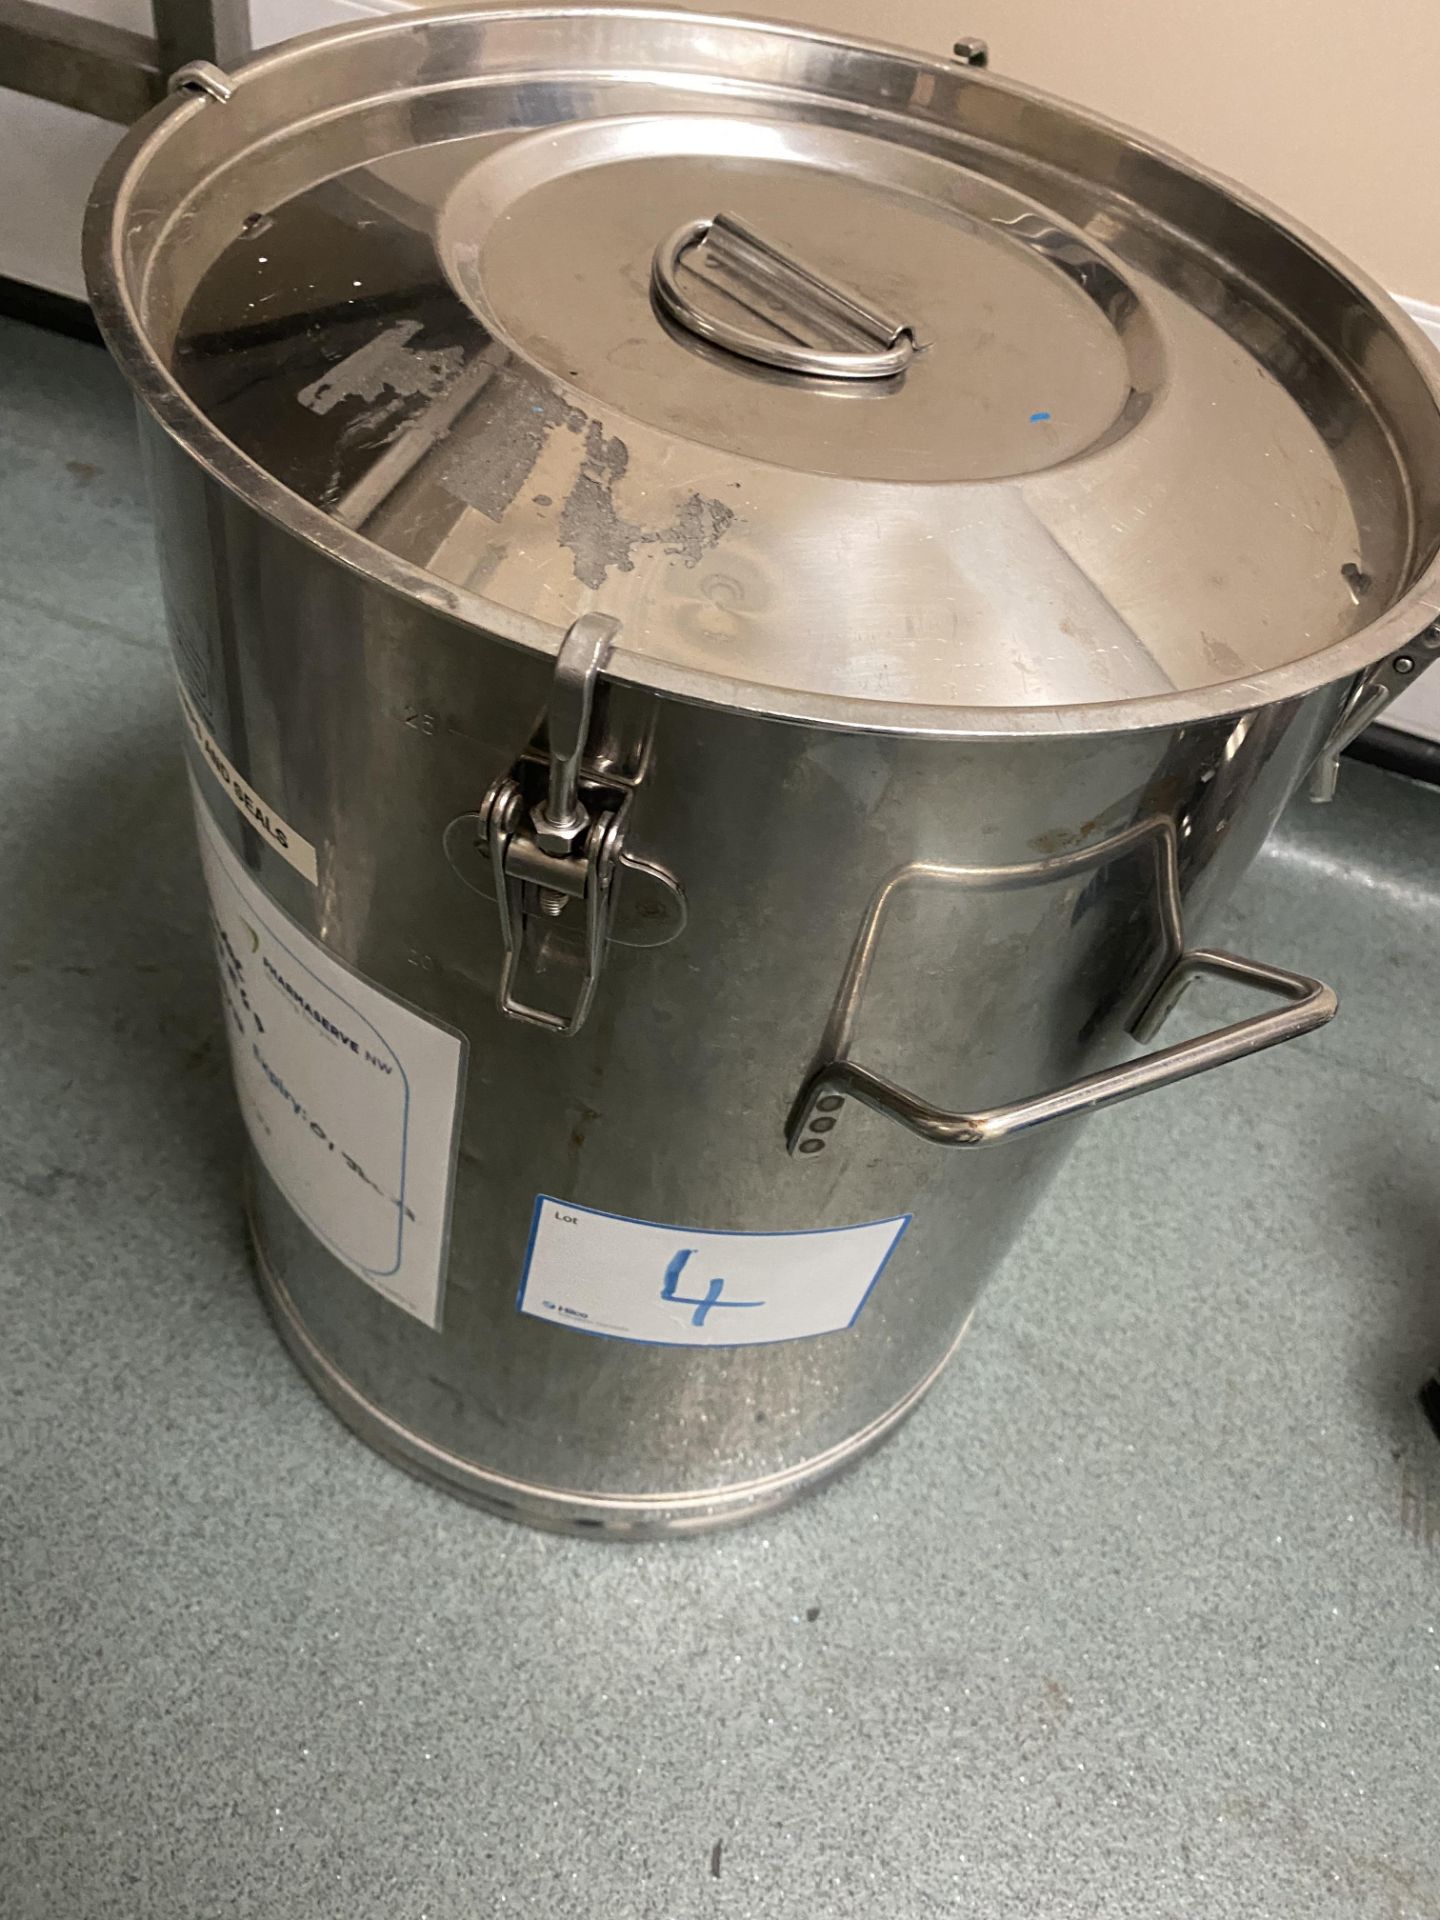 1, Velp RC2 Heating Plate, 2: Stainless Steel Buckets, 4: Small Stainless Steel Jugs - Image 4 of 4